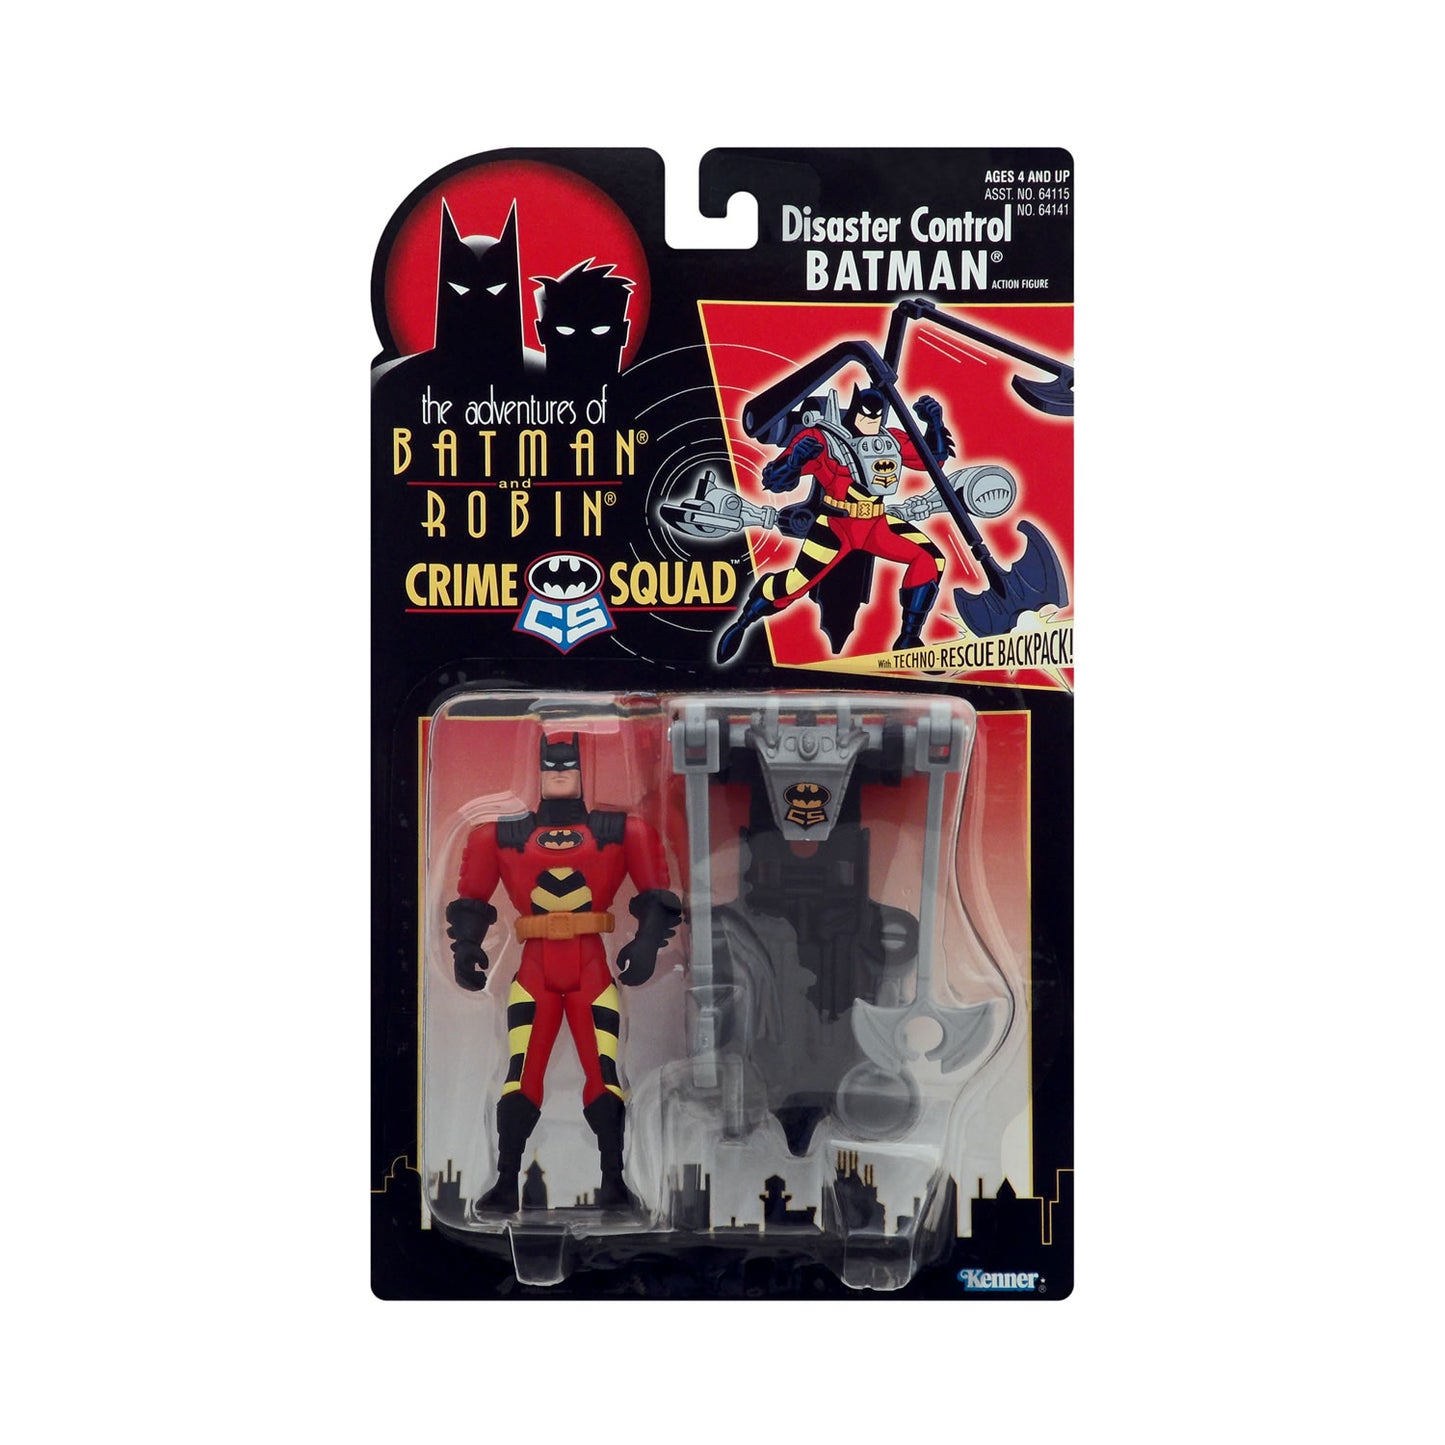 Crime Squad Disaster Control Batman from the Adventures of Batman and Robin